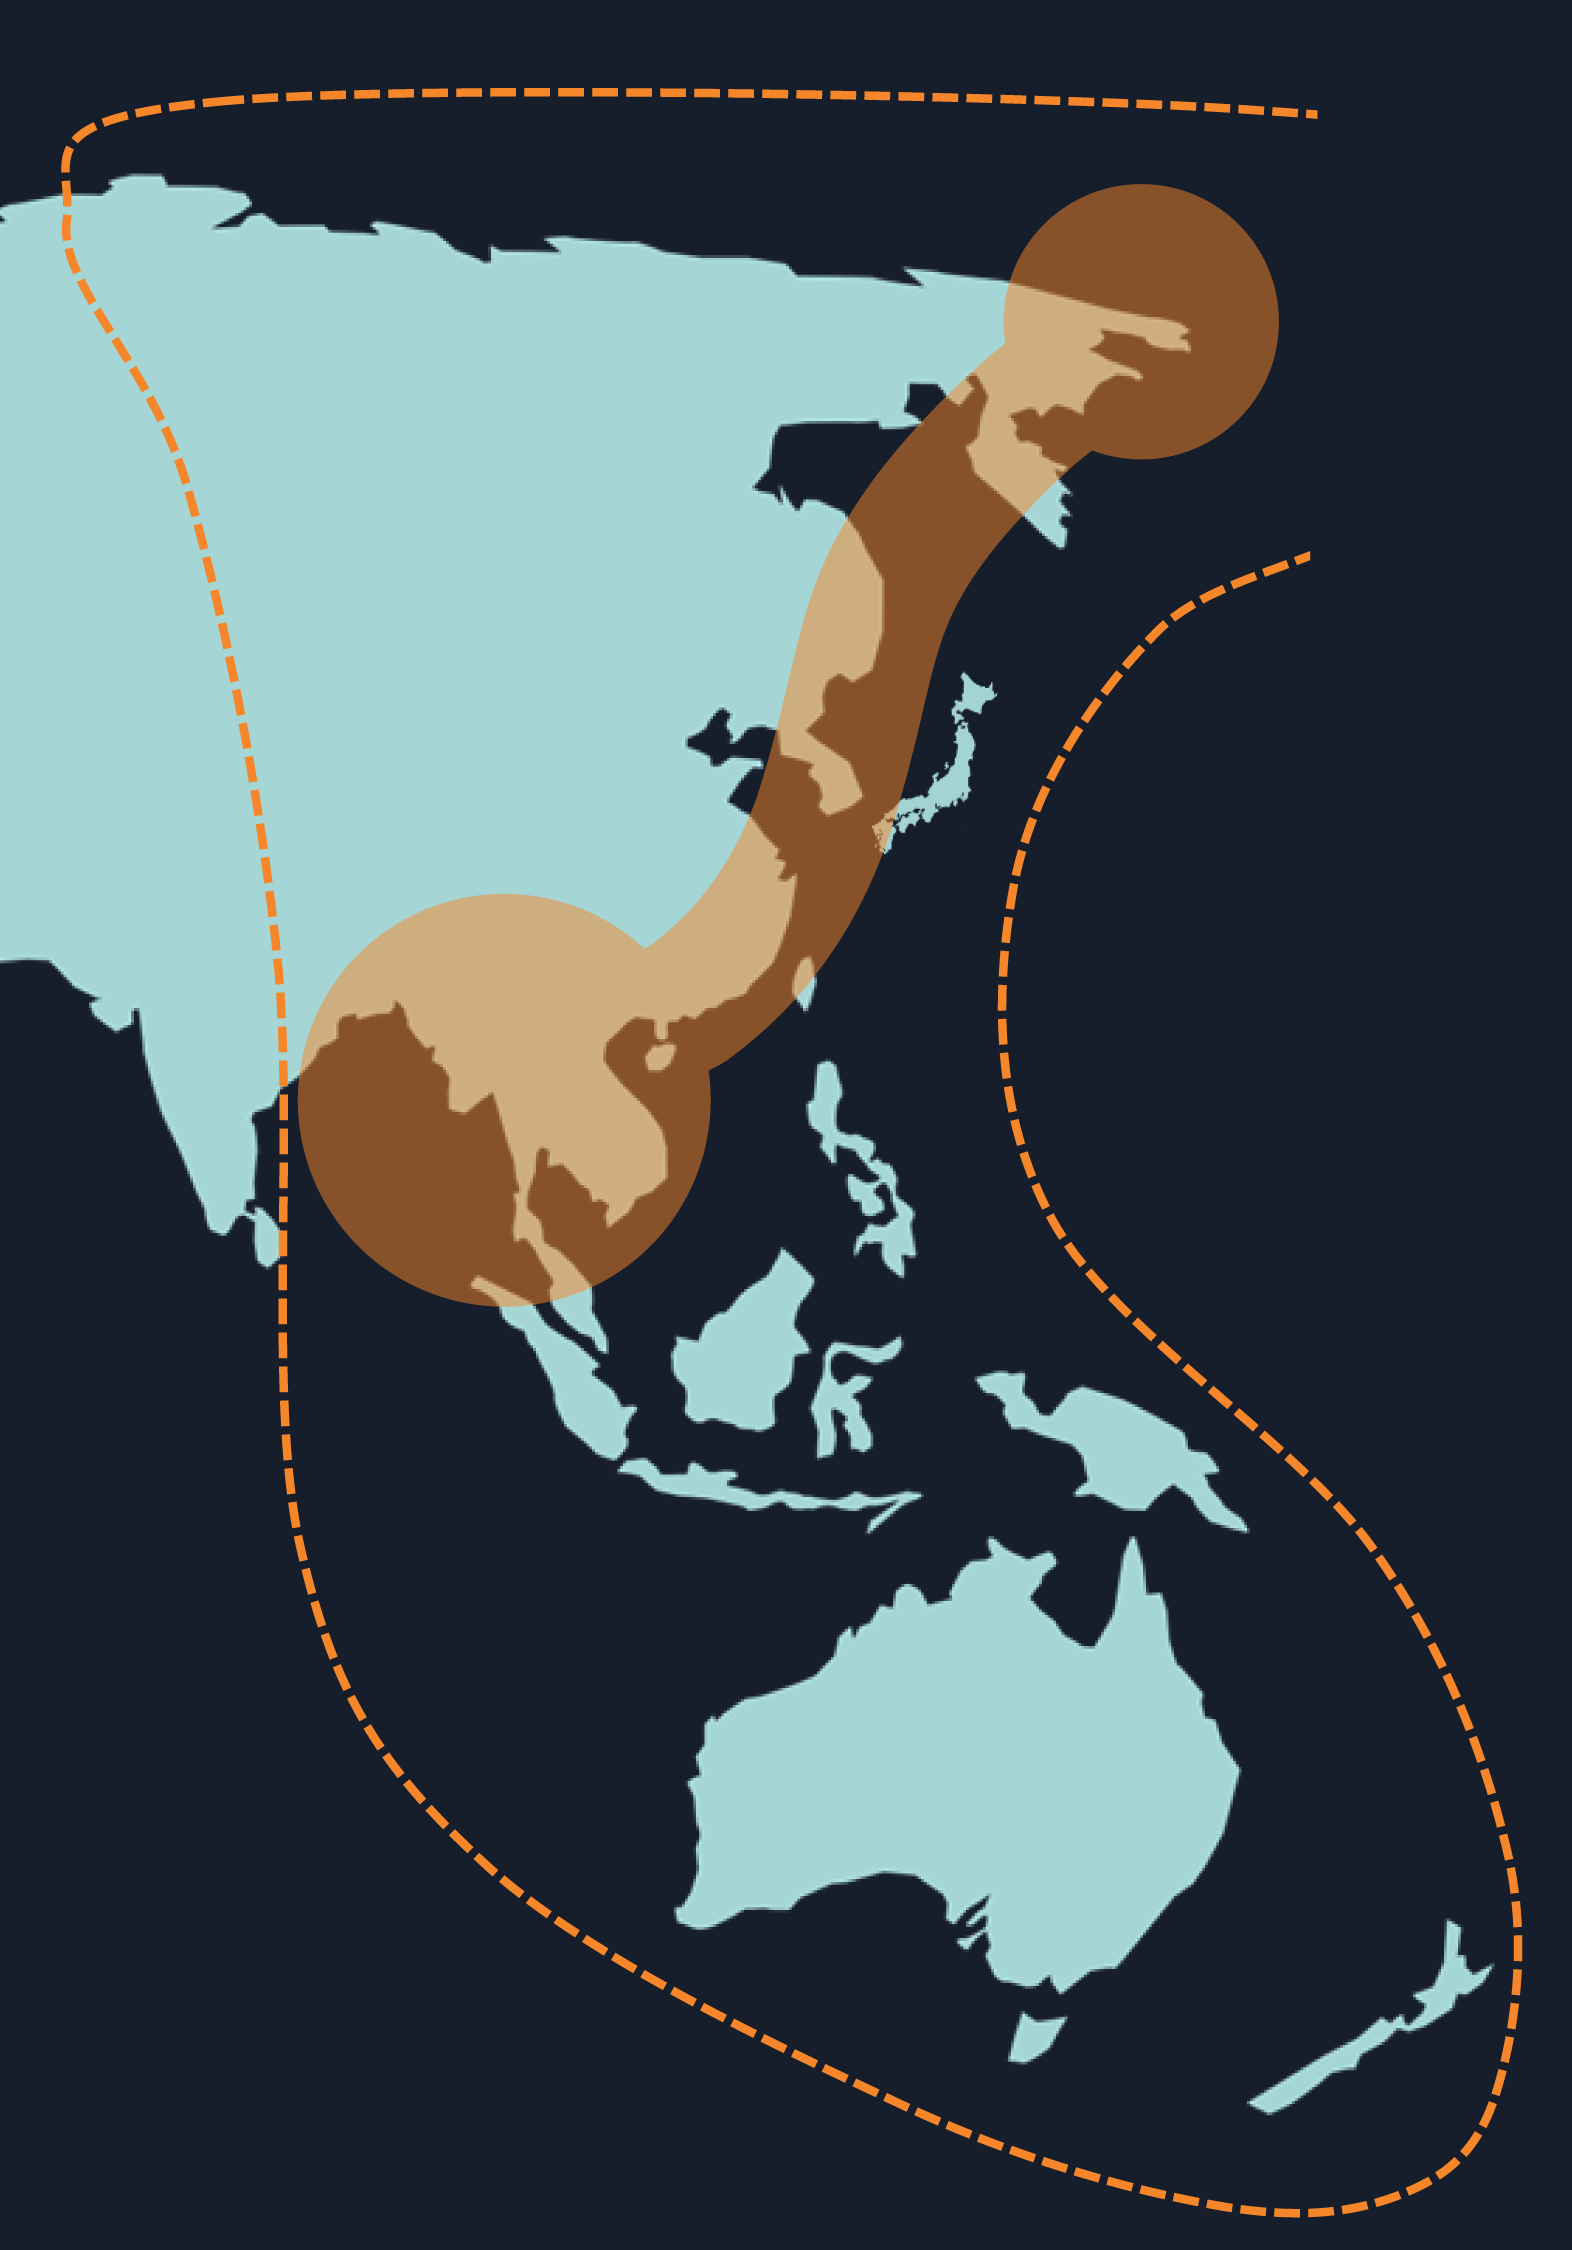 The East Asian - Australasian “Flyway” (Credit WWT)